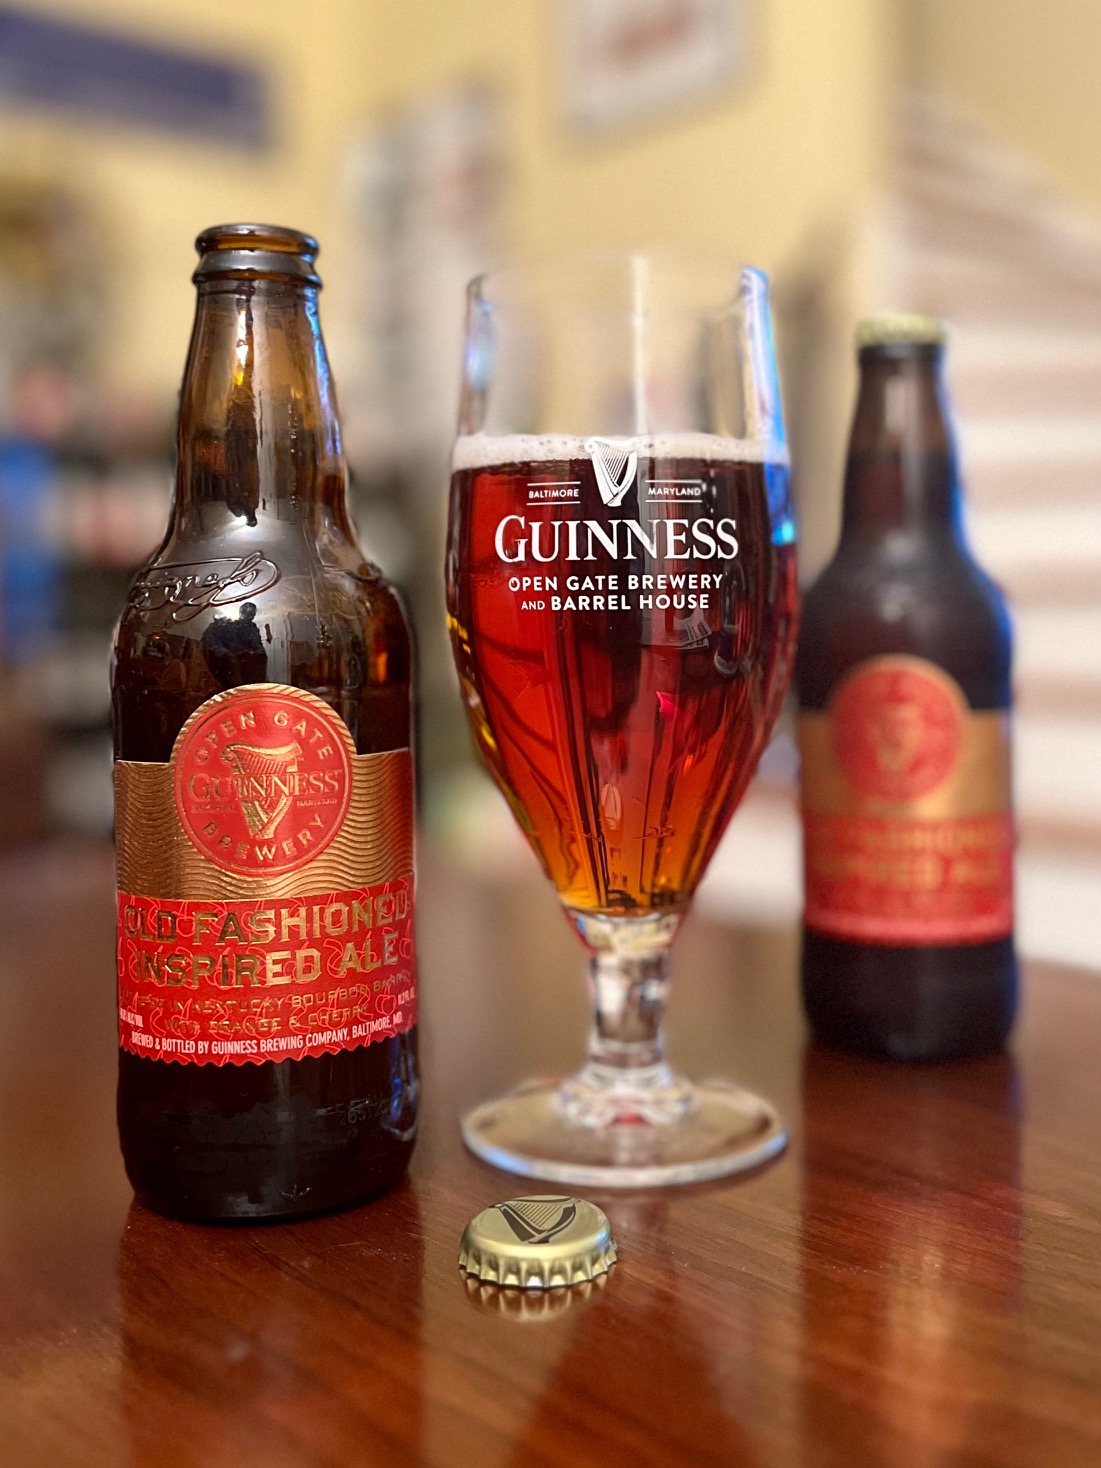 Guinness Old Fashioned Inspired Ale is a new barrel-aged beer from the brewery's Open Gate Brewery in Maryland.